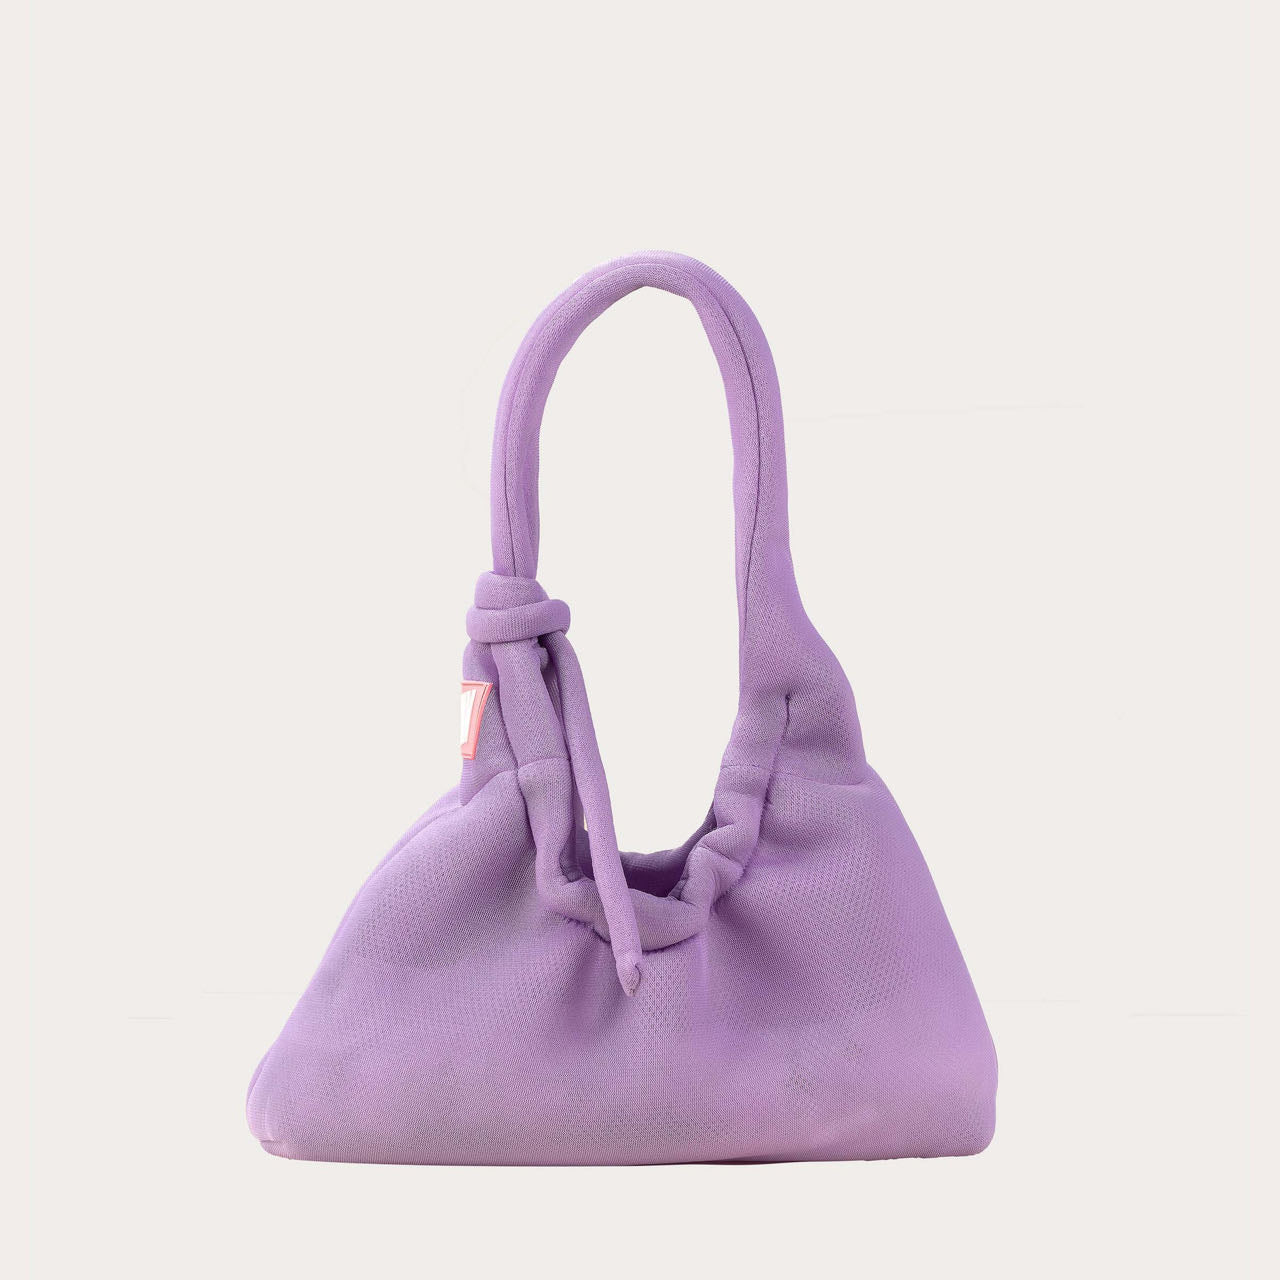 Everyday Carry Bag Small in Lavendar